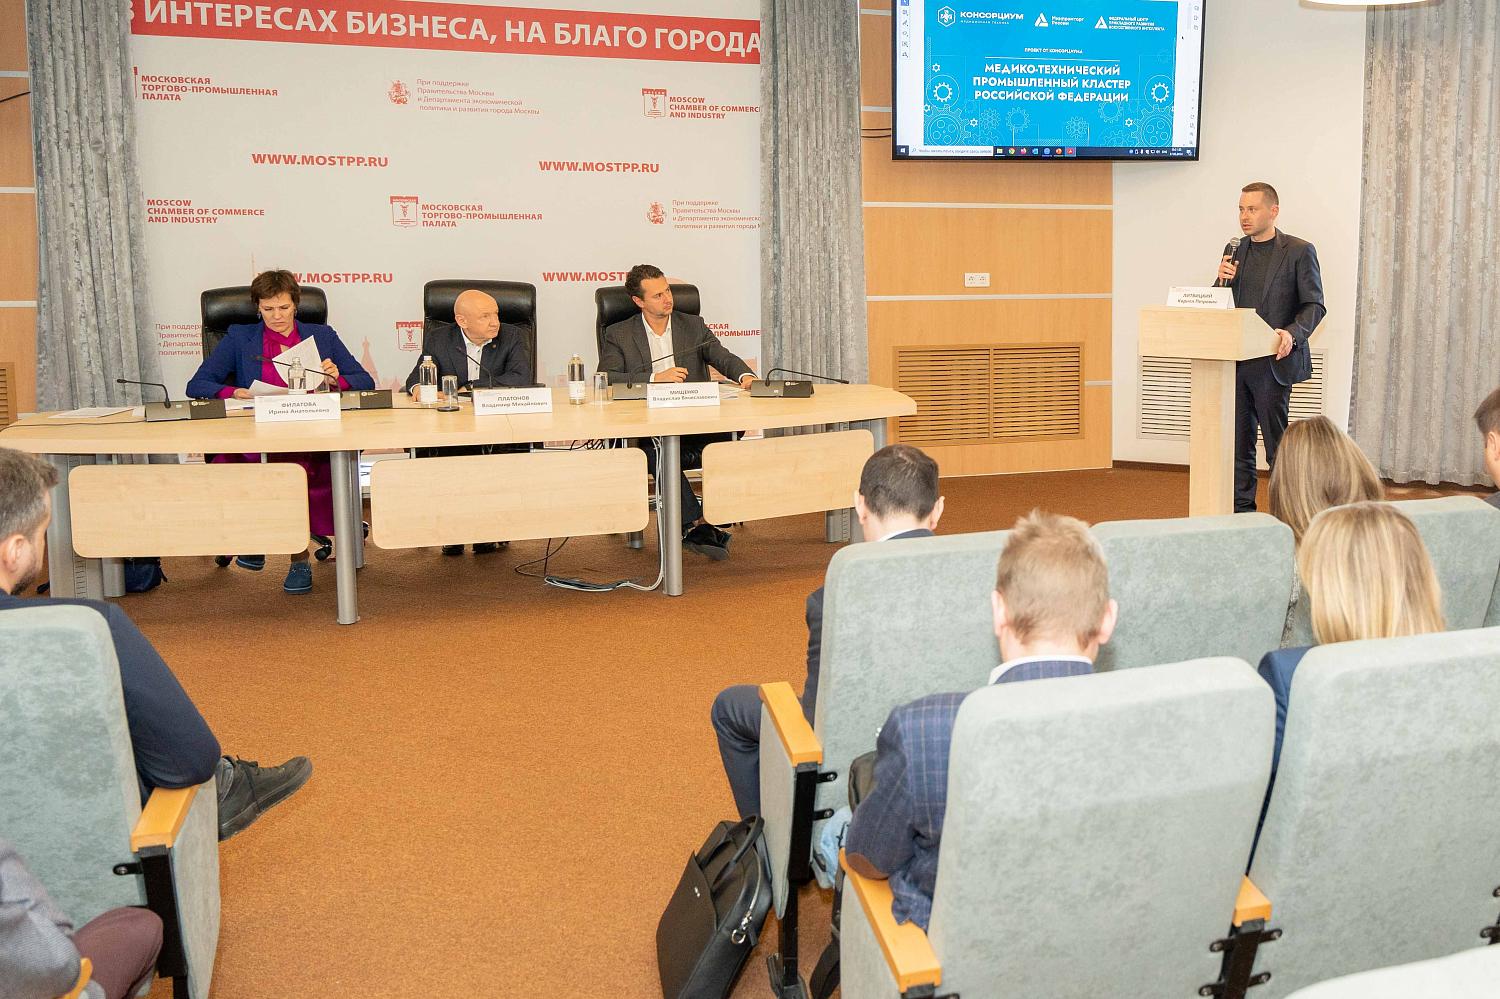 Entrepreneurs of the medical industry received information on the peculiarities of foreign economic activity in modern conditions